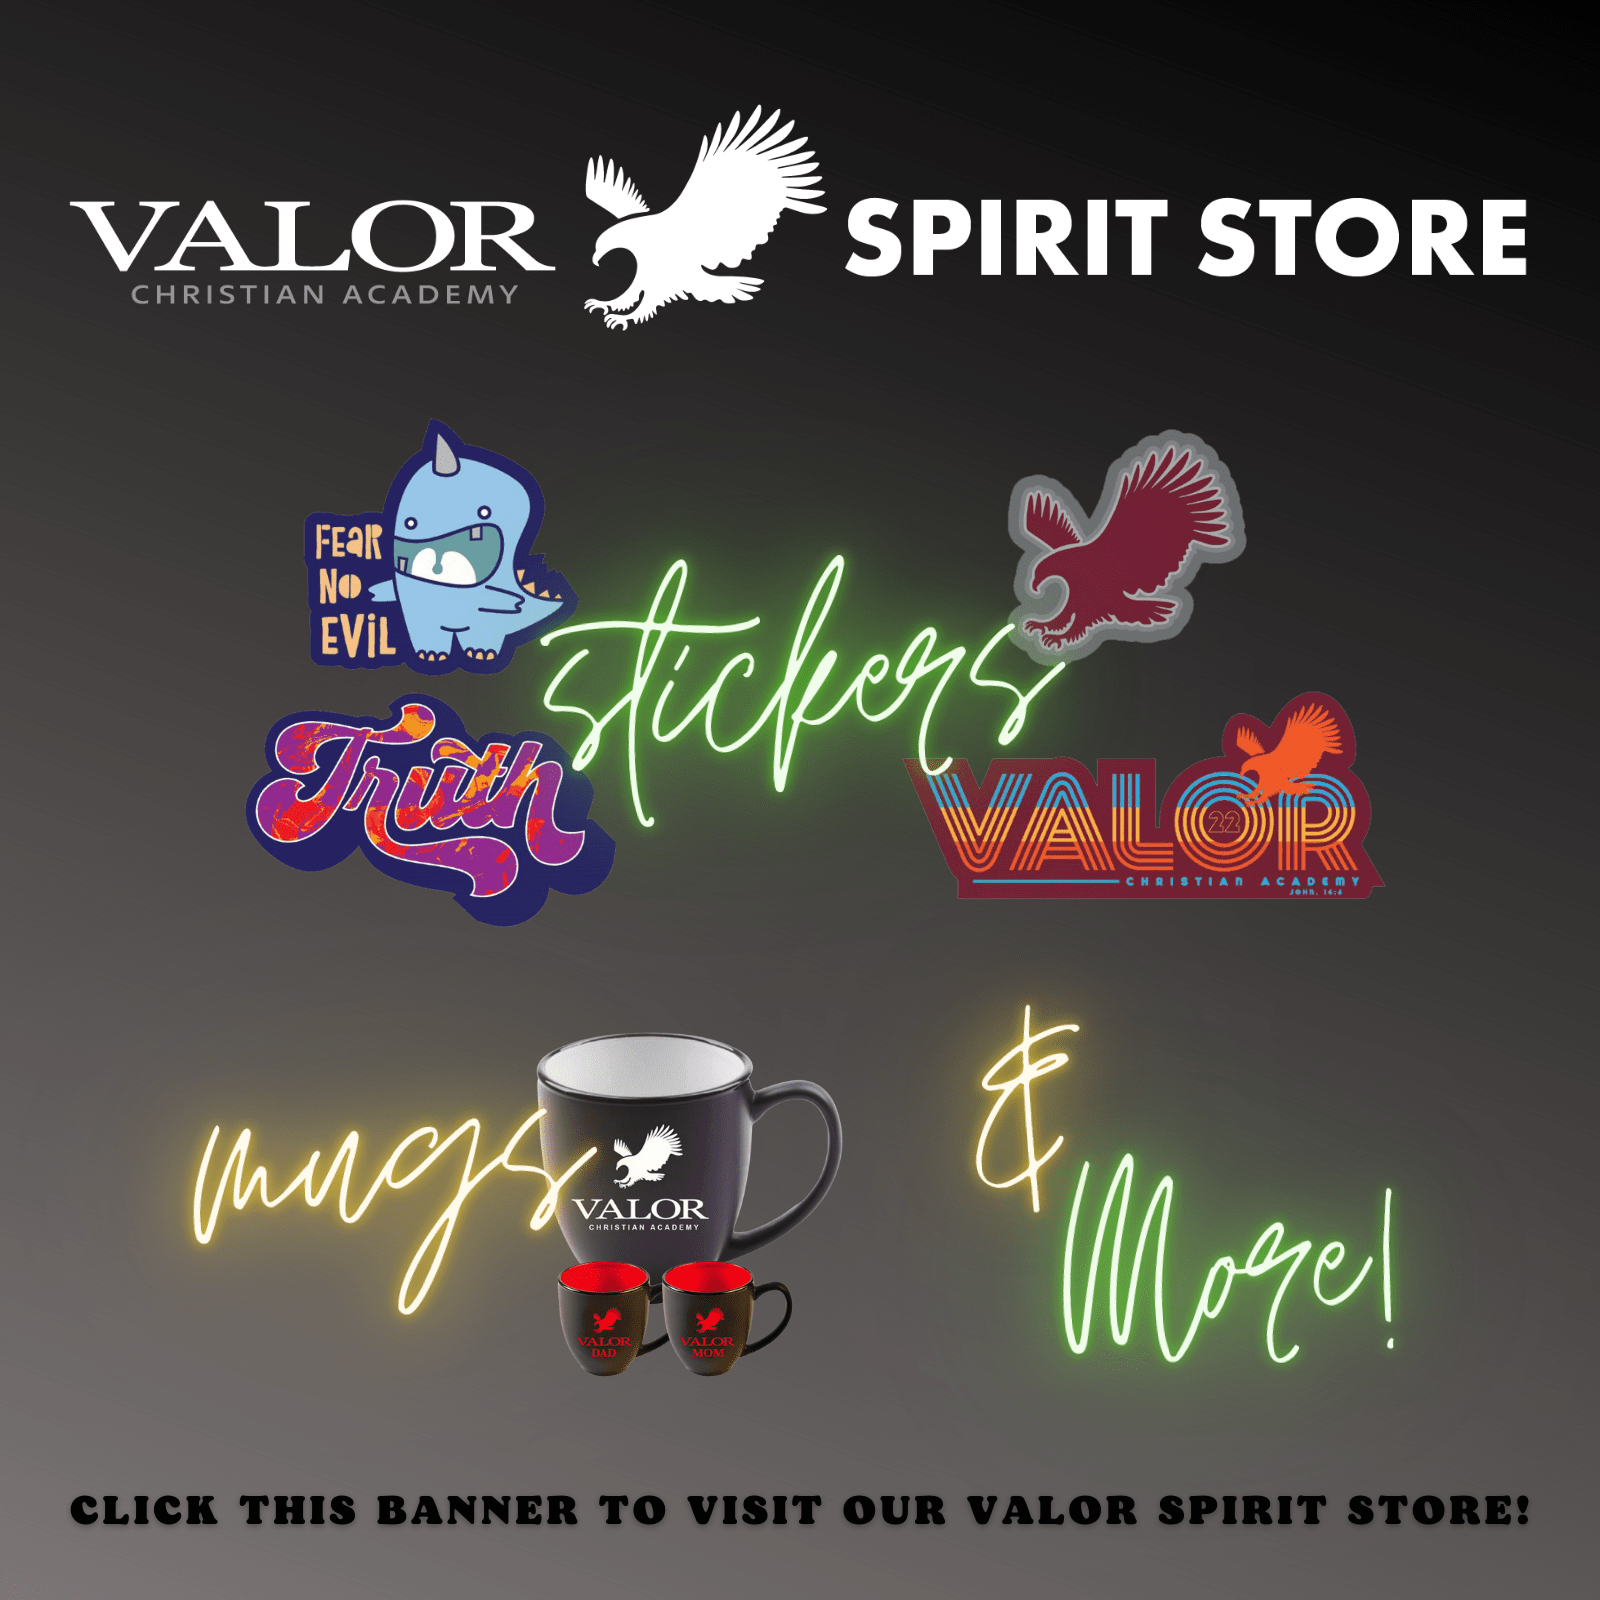 Valor Spirit Store -links to our external Valor store in a new tab or window